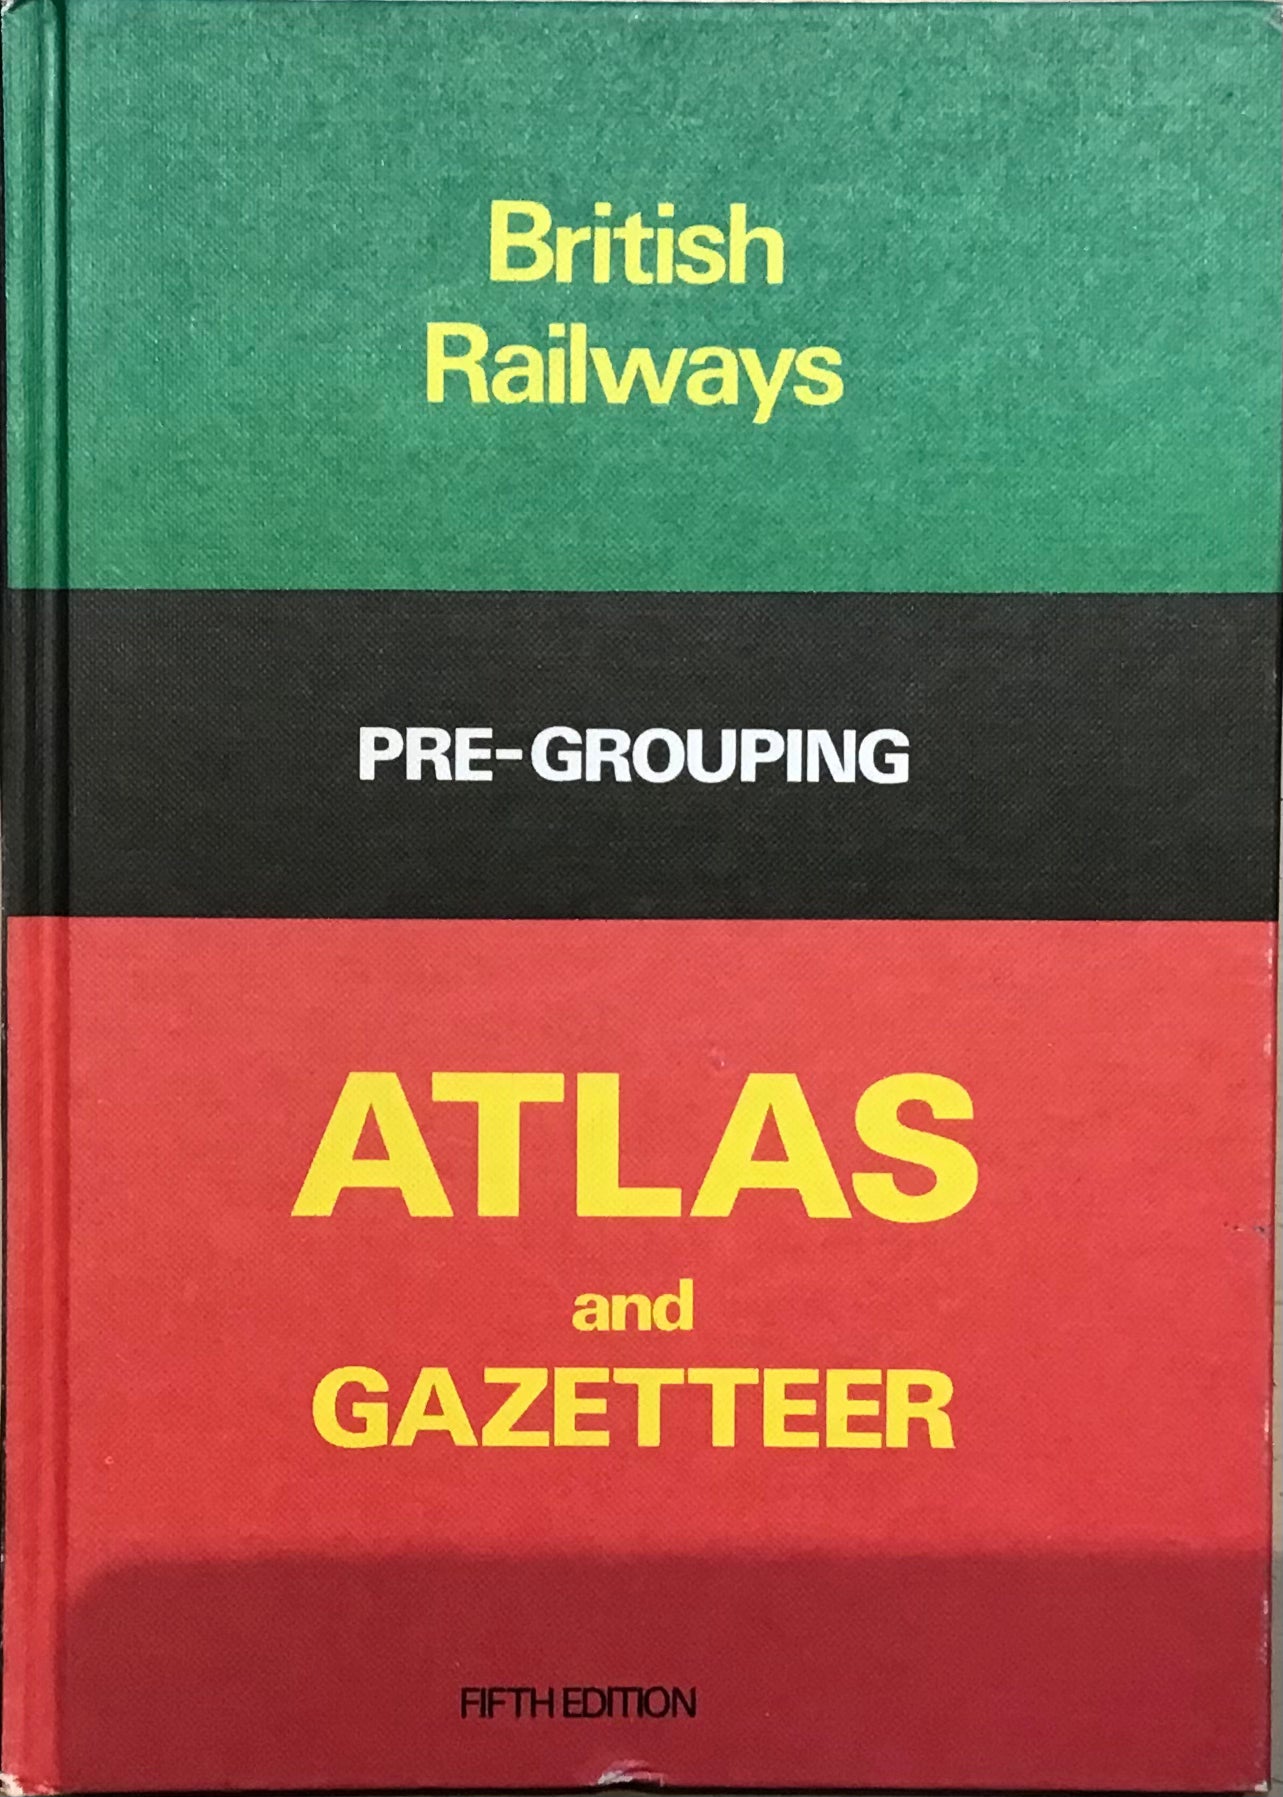 British Railways Pre-Grouping Atlas and Gazetteer - Fifth Edition - Chester Model Centre